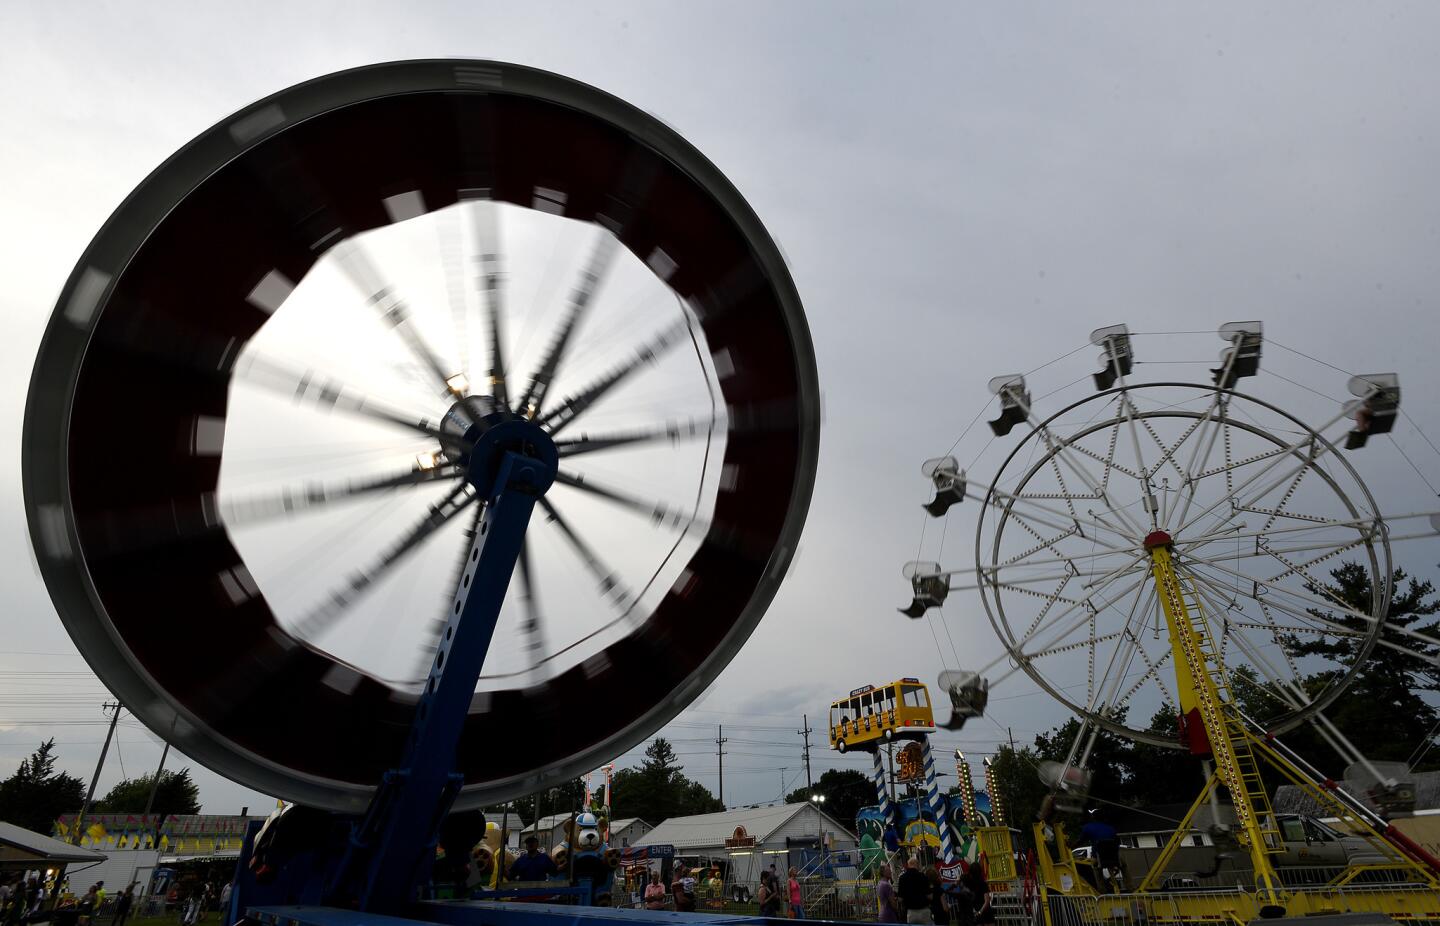 Carnival rides are a featured attraction at the Union Bridge fire company carnival Tuesday, May 28, 2019.